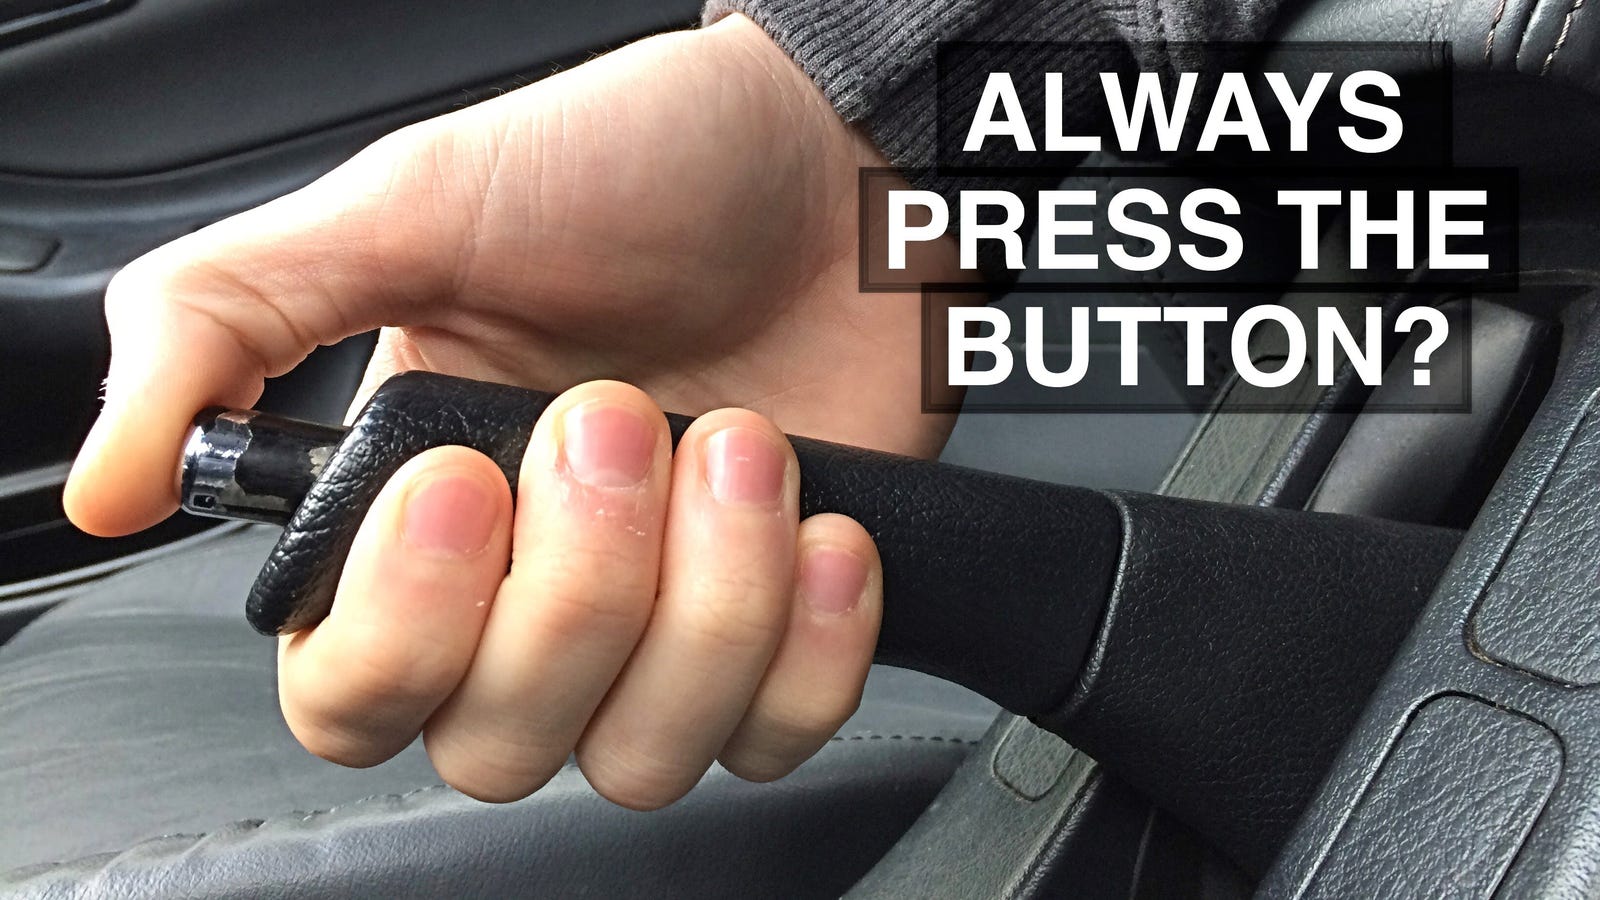 Why It's Okay to Pull the Handbrake Without Pushing the Button